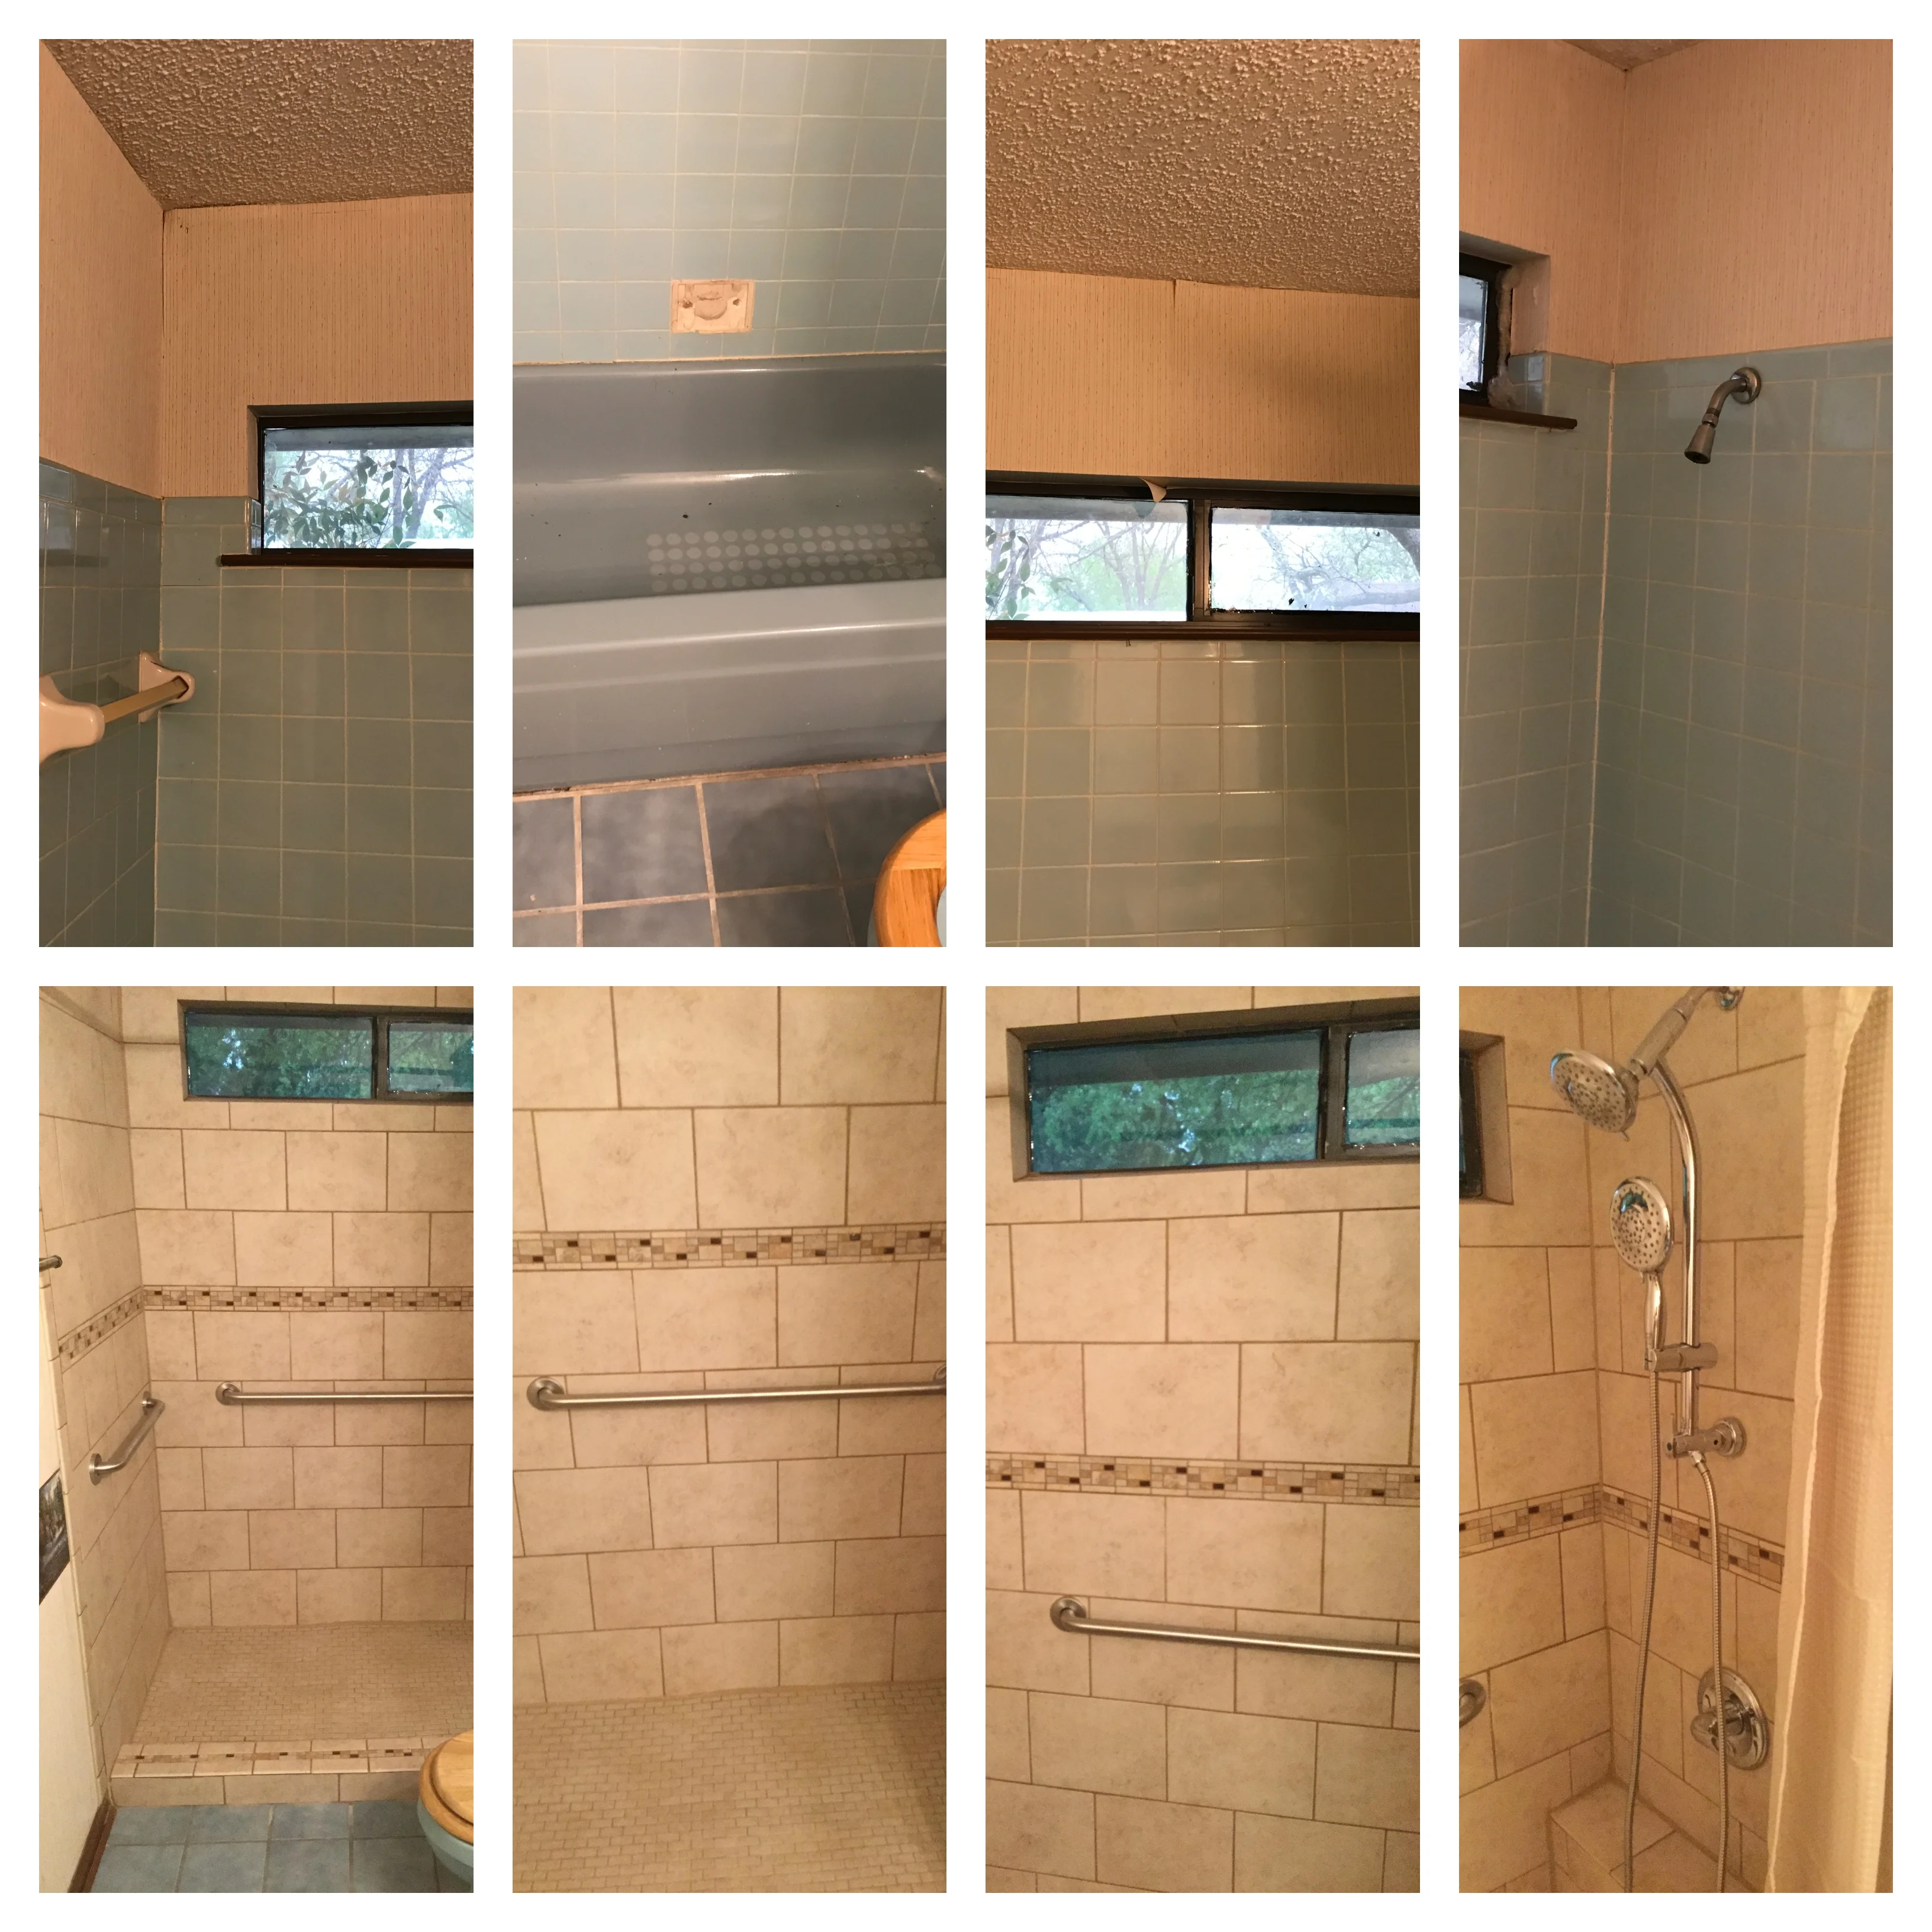 Several points of view of a shower remodel before and after it has been completed by a Sachse handyman.